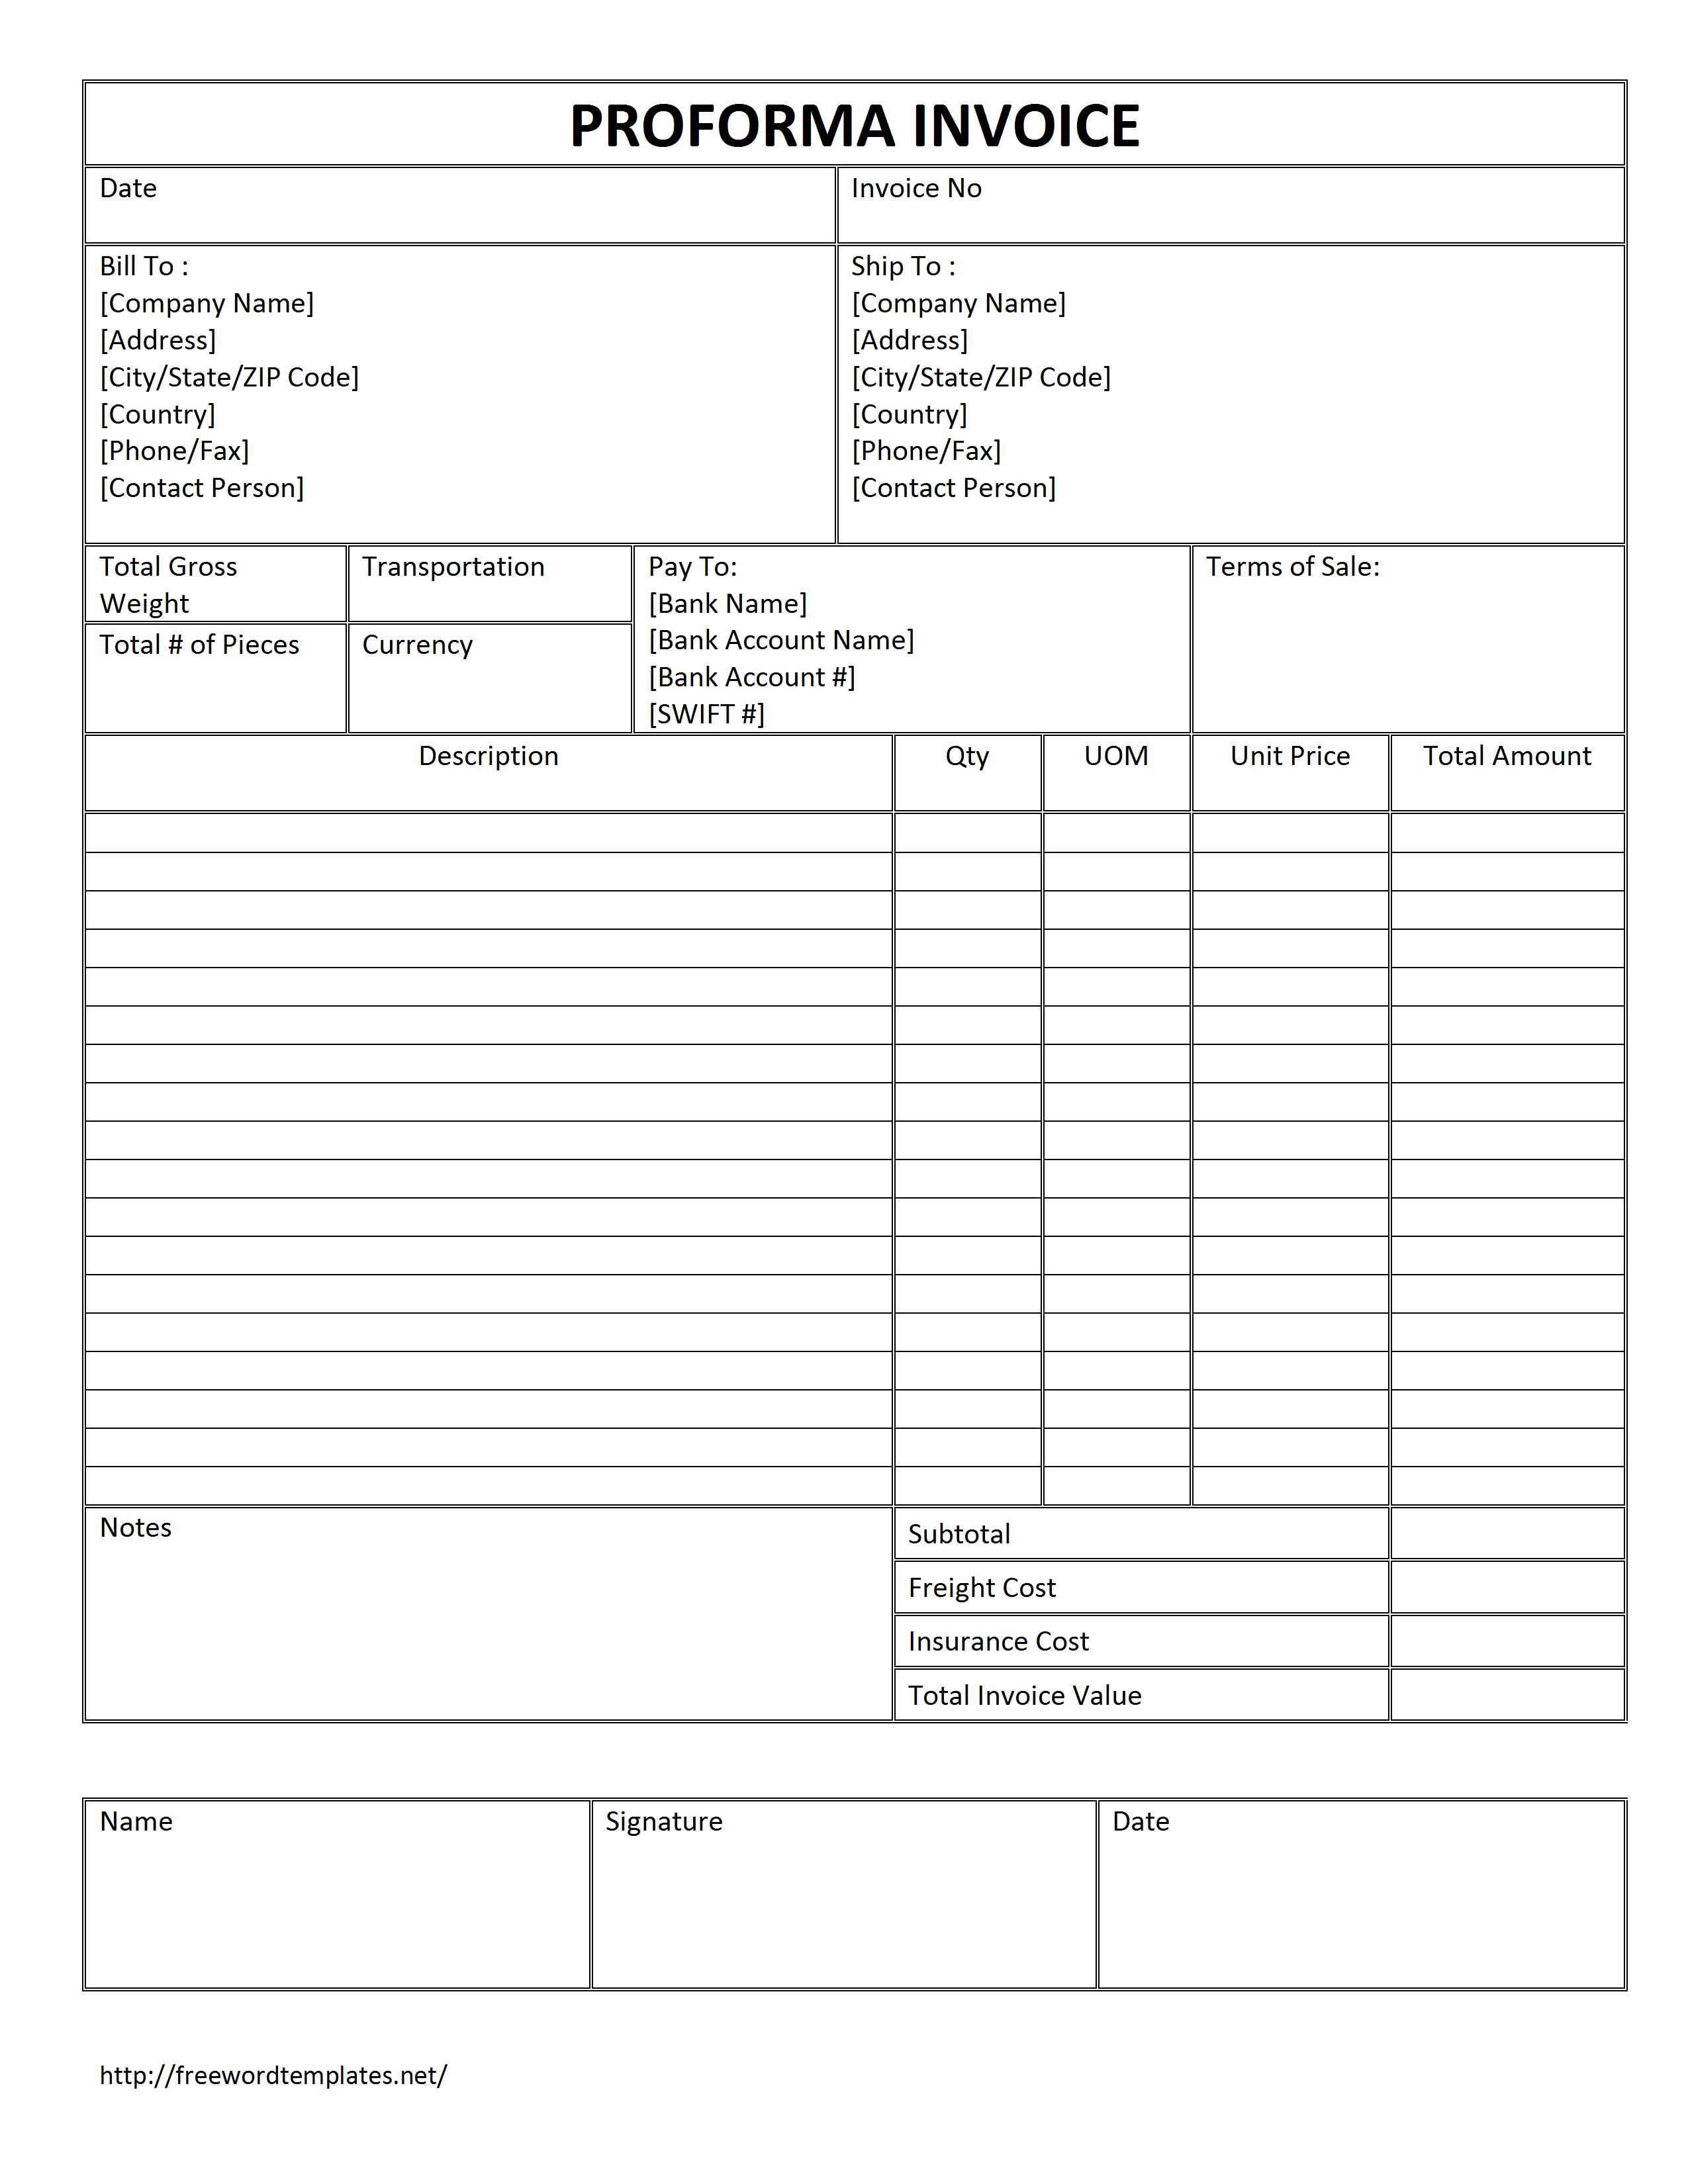 proforma invoice template payment invoice template free cool payment invoice template free